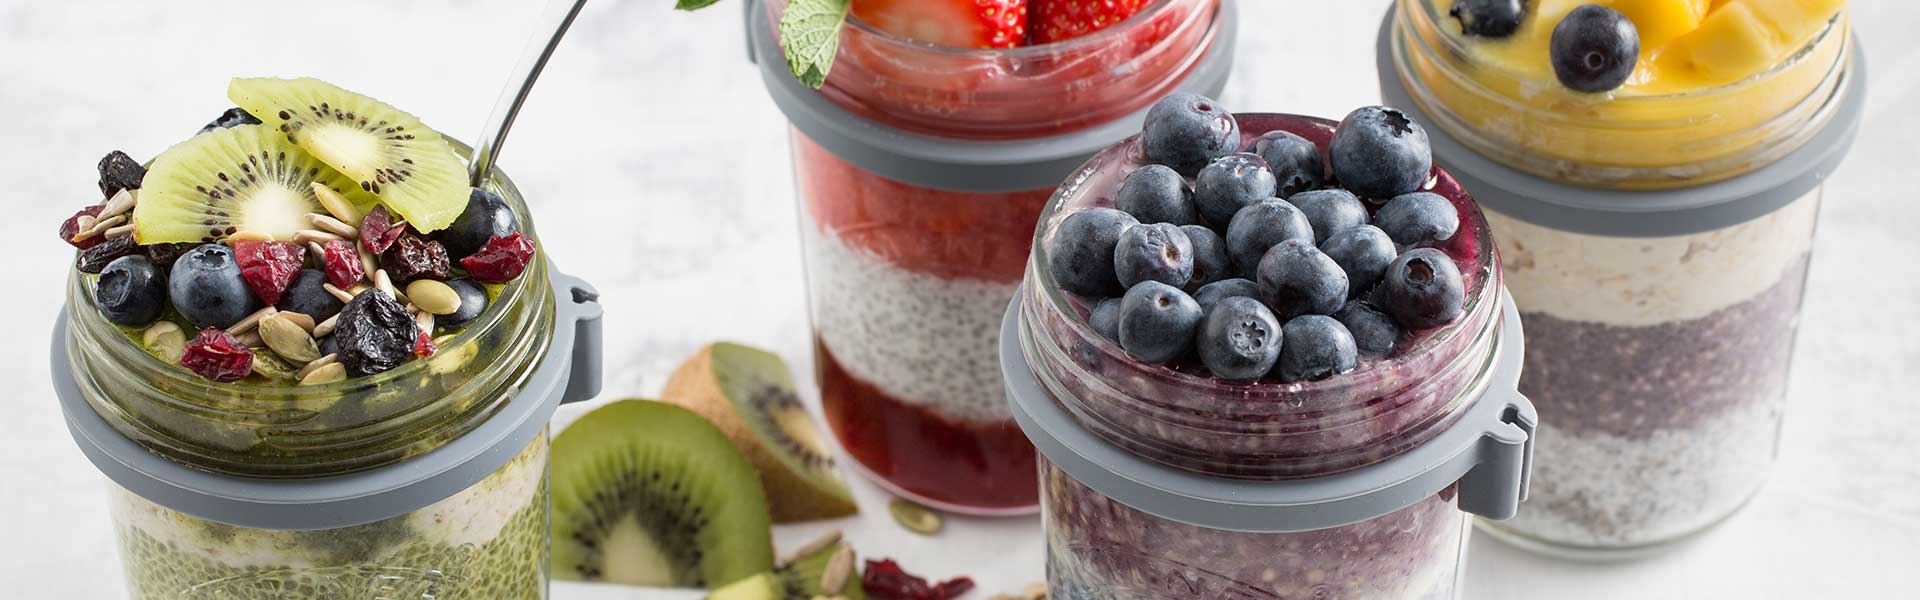 Glass jars filled with layers of yoghurt, compote, and fruit - Summer kitchen essentials - Goodhomesmagazine.com